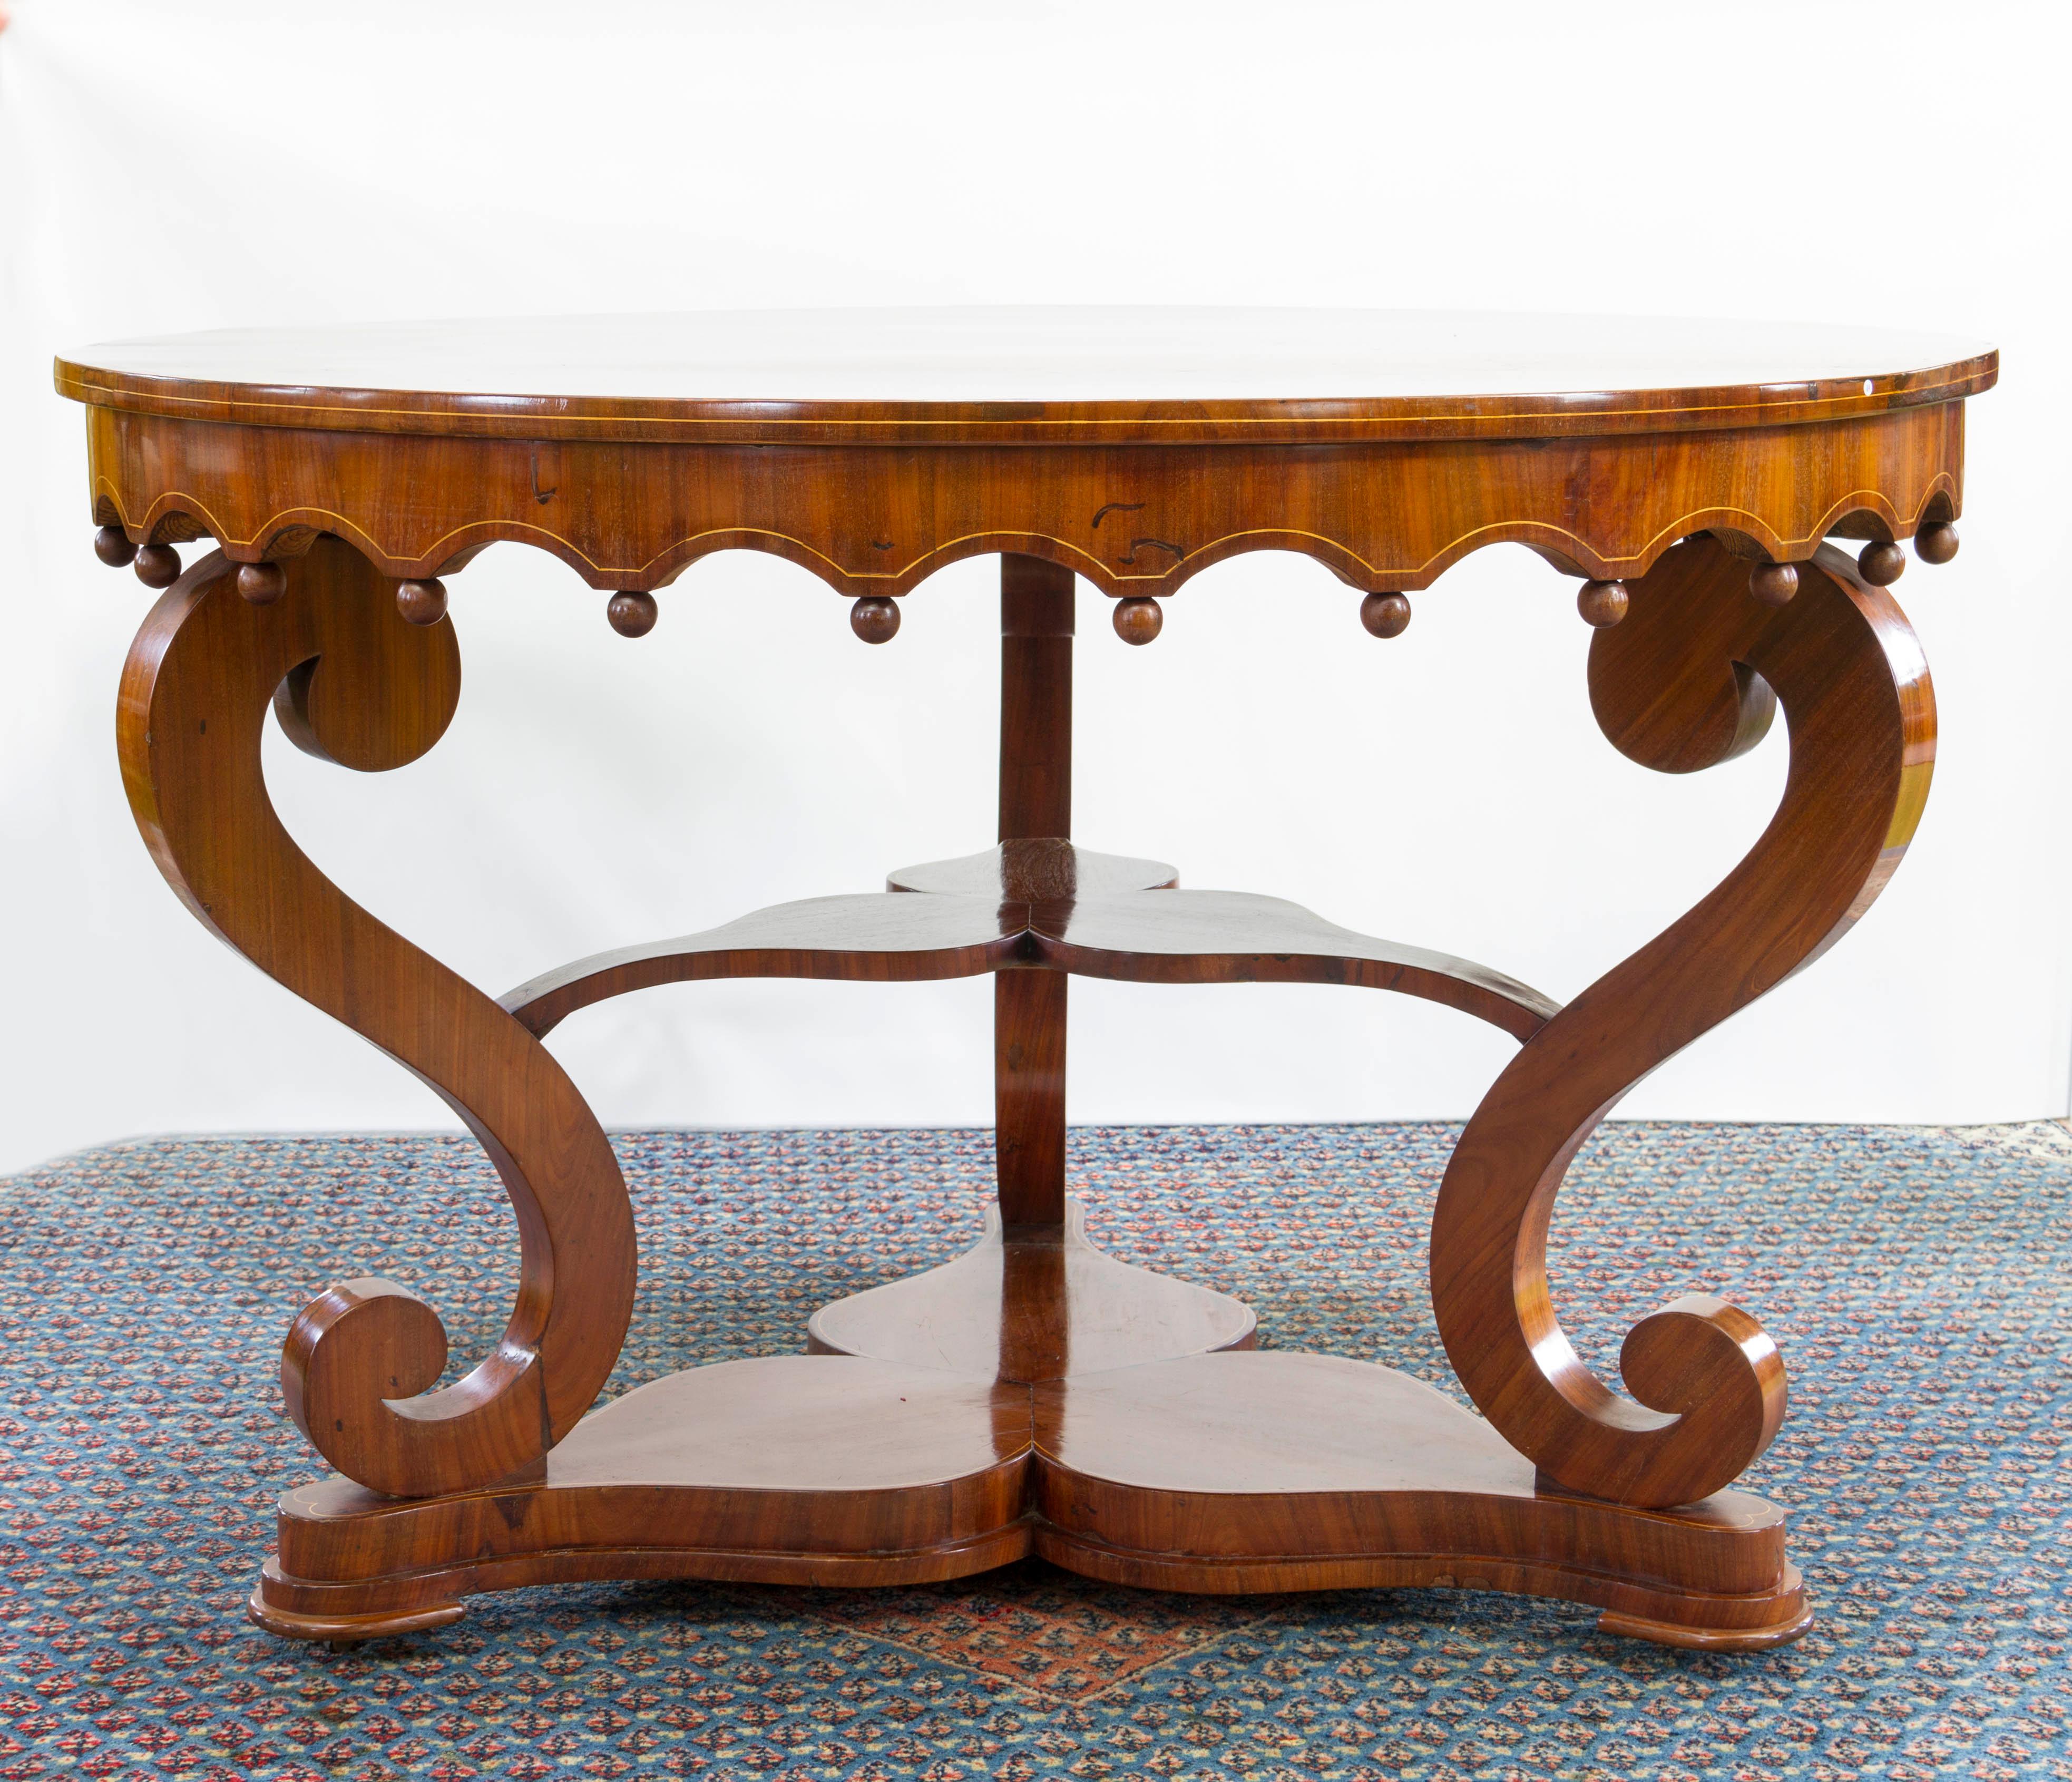 Biedermeier Mahogany Centre Table, Workshop of Johannes Klinckerfuss, 1830

Mahogany veneered with lightwood banding, with gabled frieze, on three scrolled legs and a trefoil base.

Height 75 cm, diameter 48 cm


Johannes Klinckerfuss (1770 - 1831)